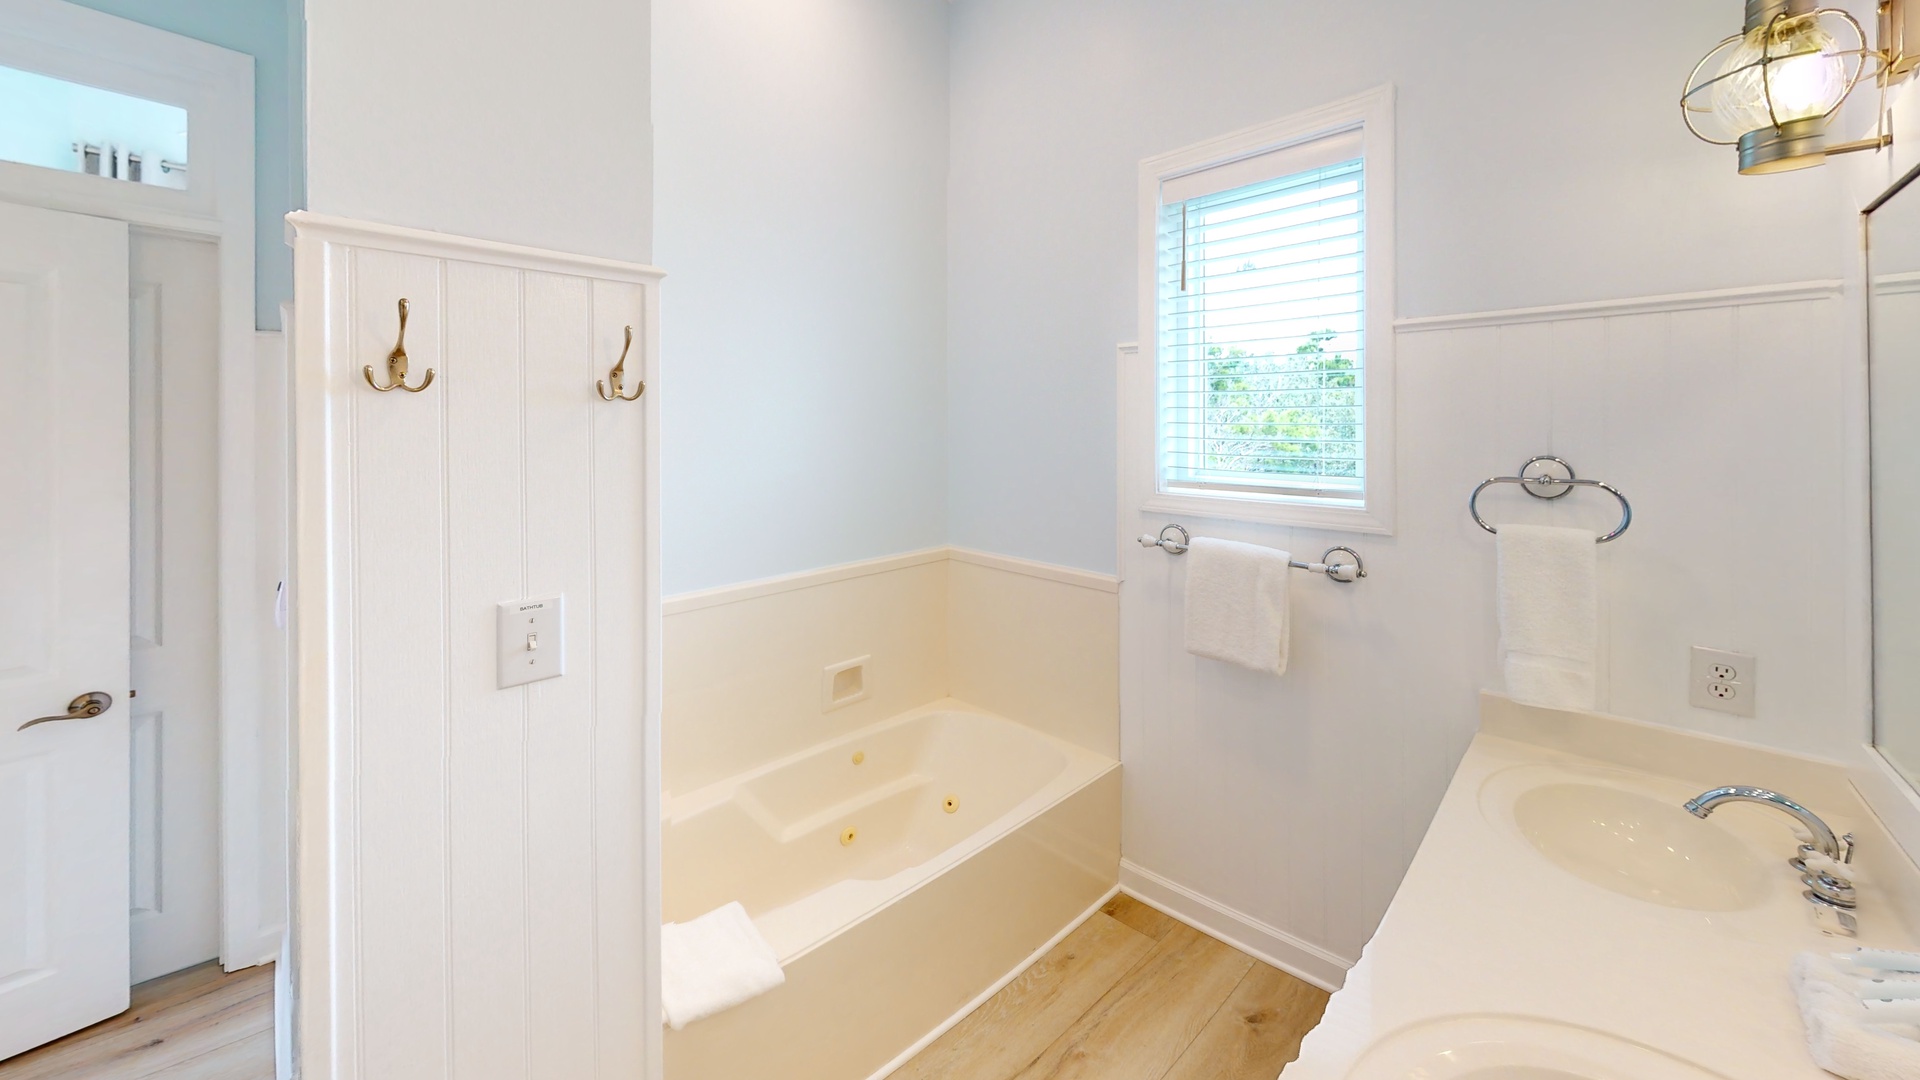 Little-Blue-Jetted tub in the 2nd floor bathroom